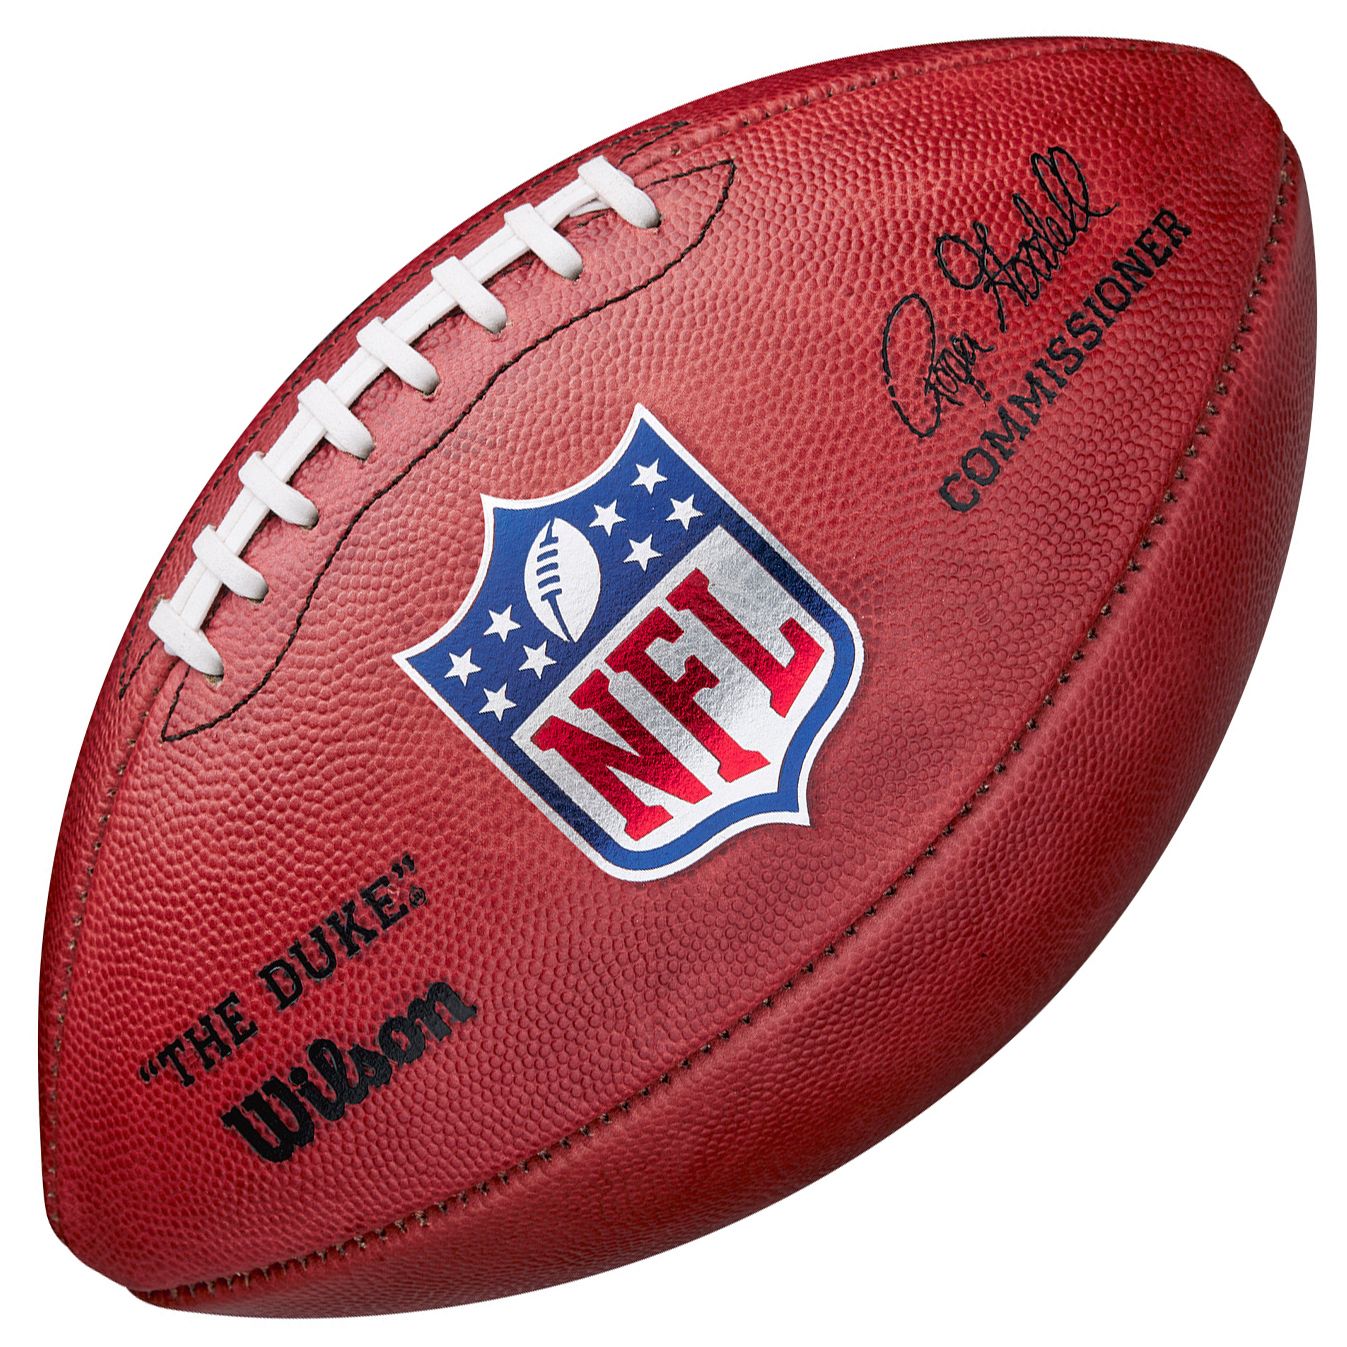 what is the official football of the nfl